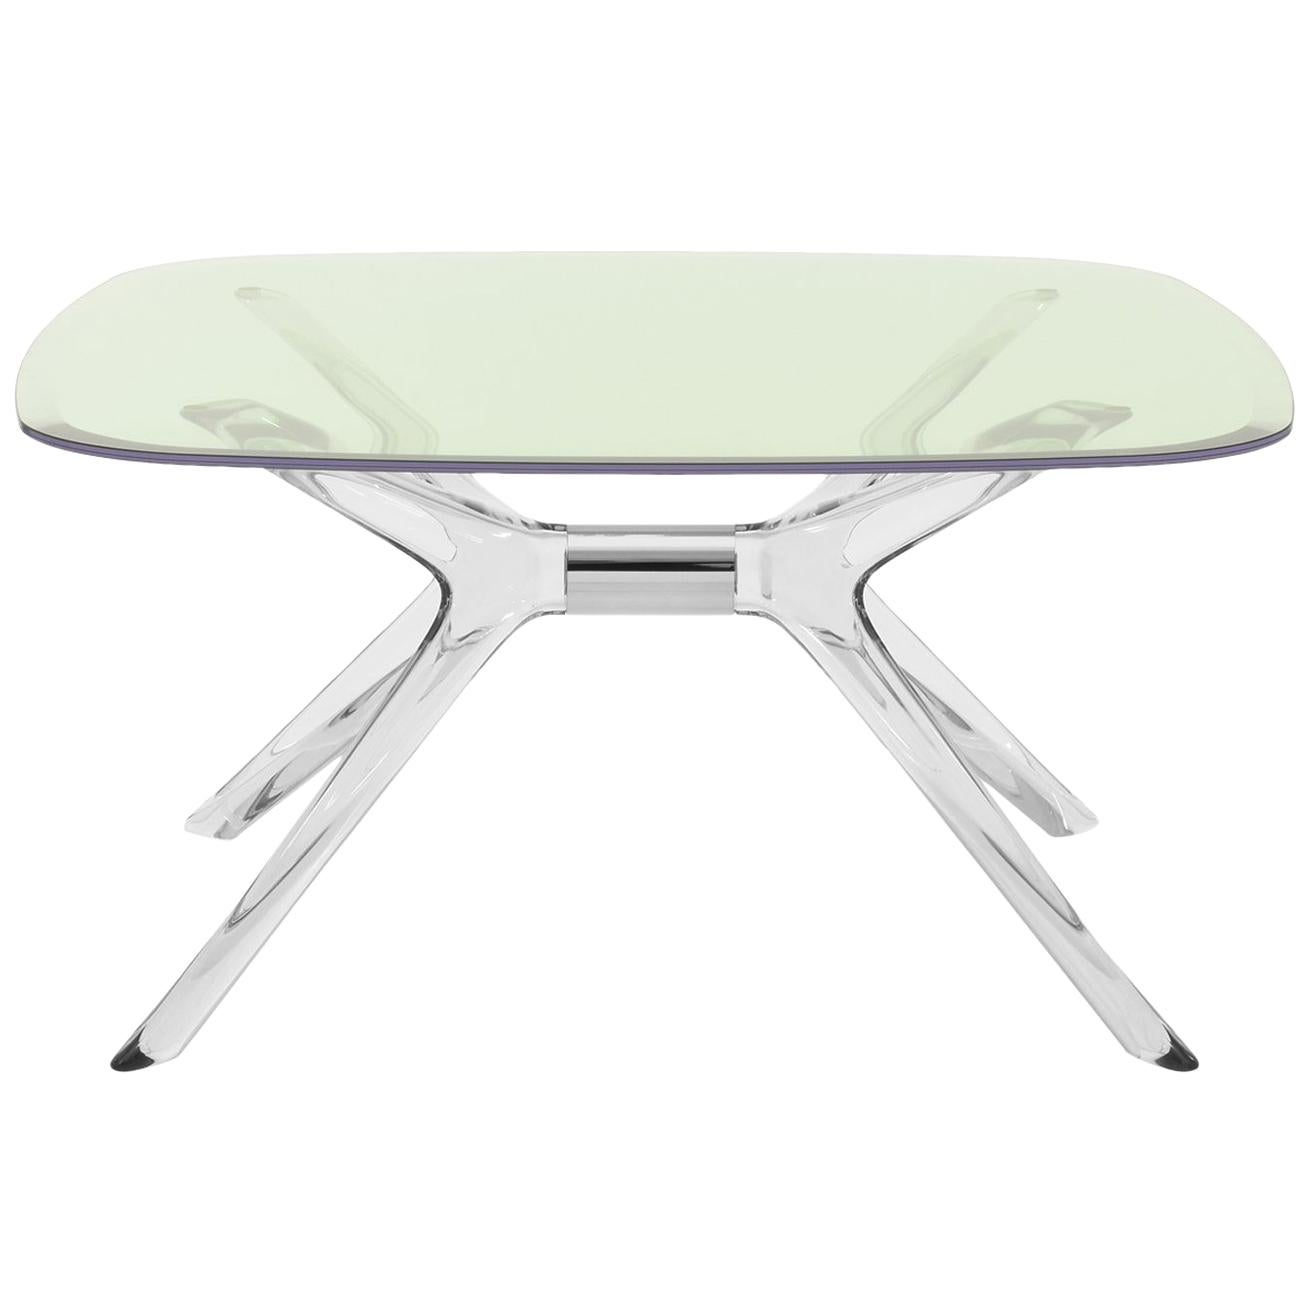 Kartell Blast Square Coffee Table in Chrome with Green Top by Philippe Starck For Sale